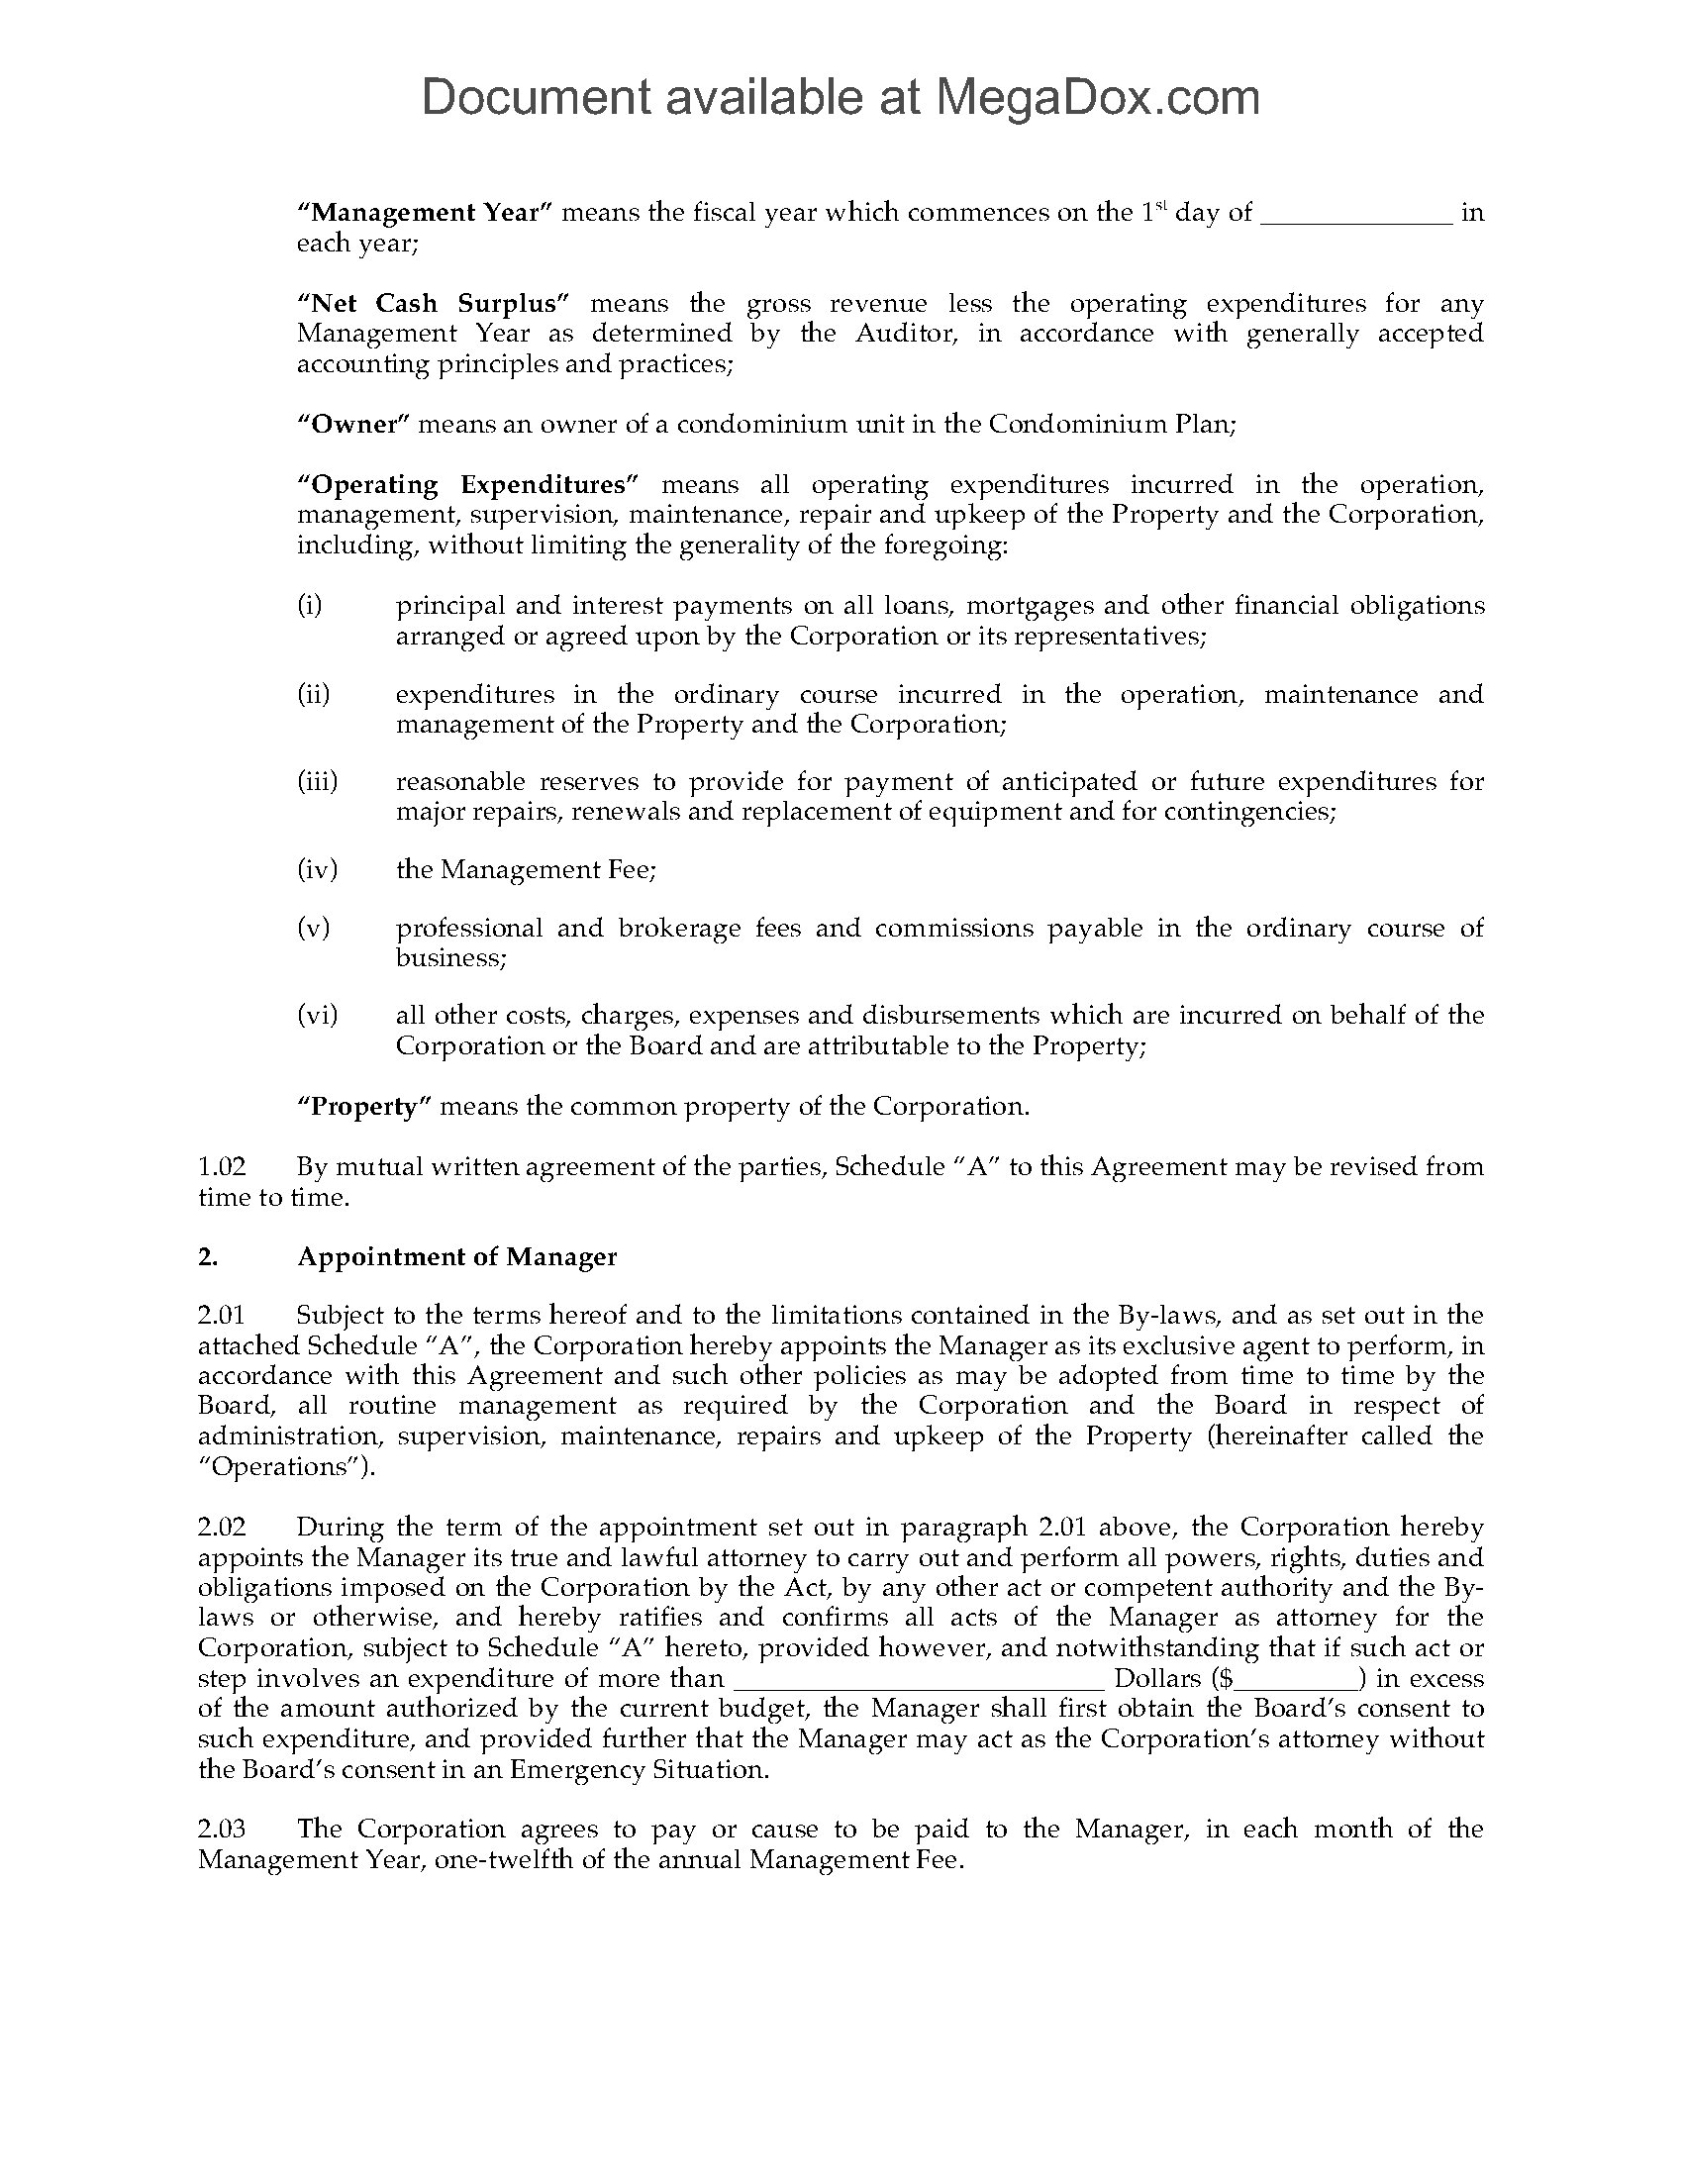 Condominium Common Property Management Agreement | Legal Forms And For Free Commercial Property Management Agreement Template